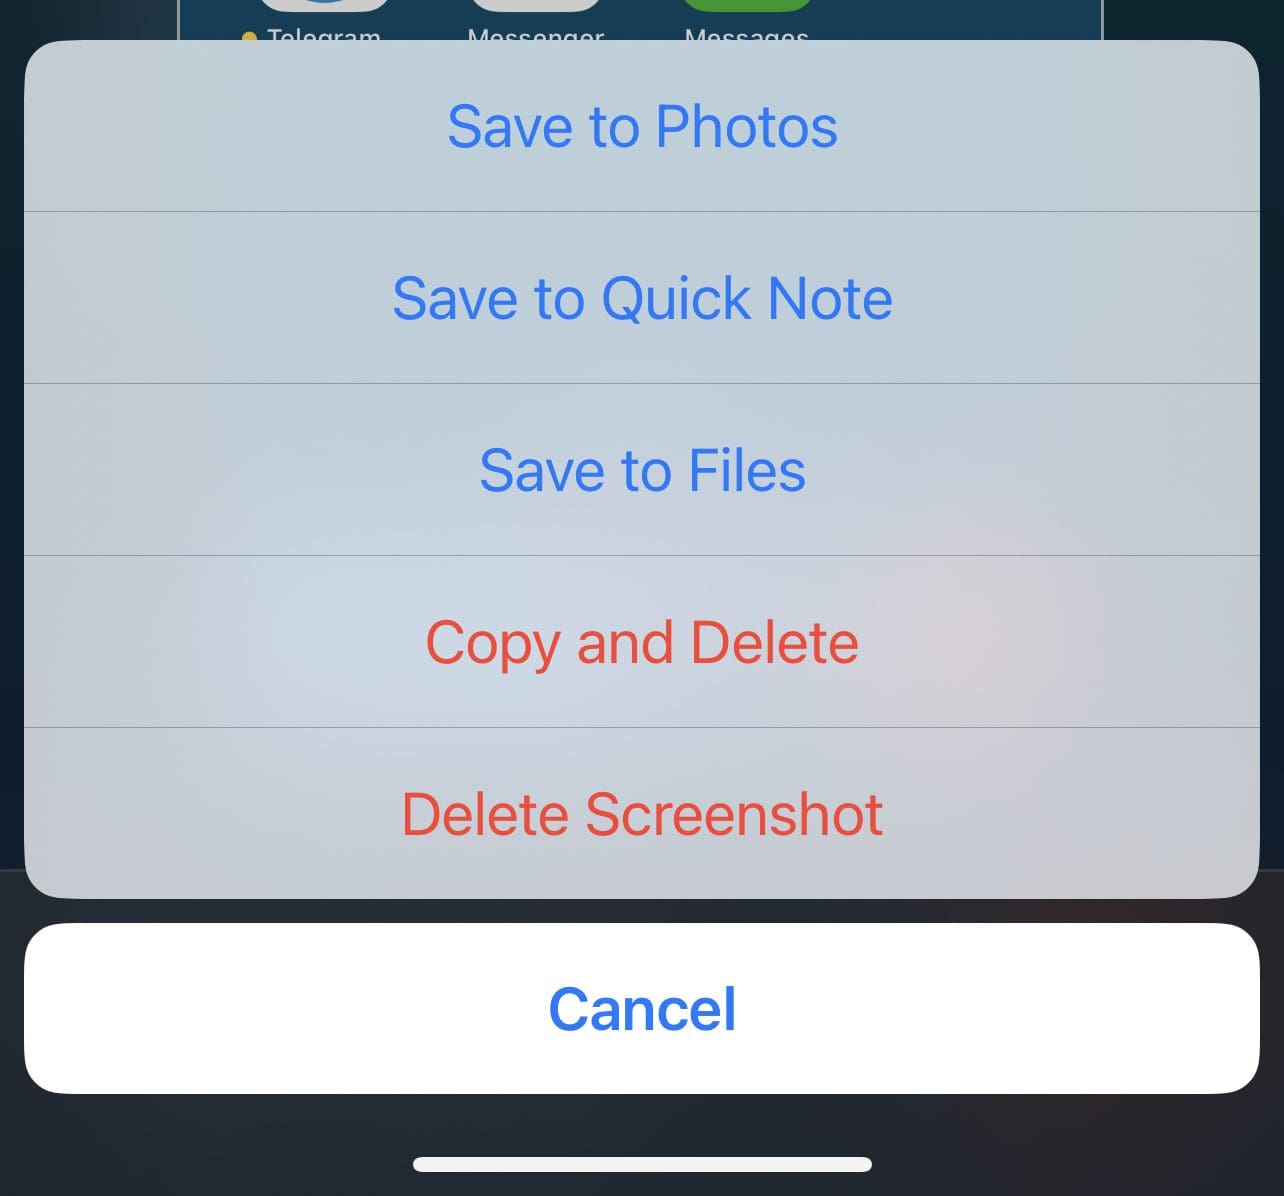 What's new in iOS 16 Beta 5 - Copy and Delete